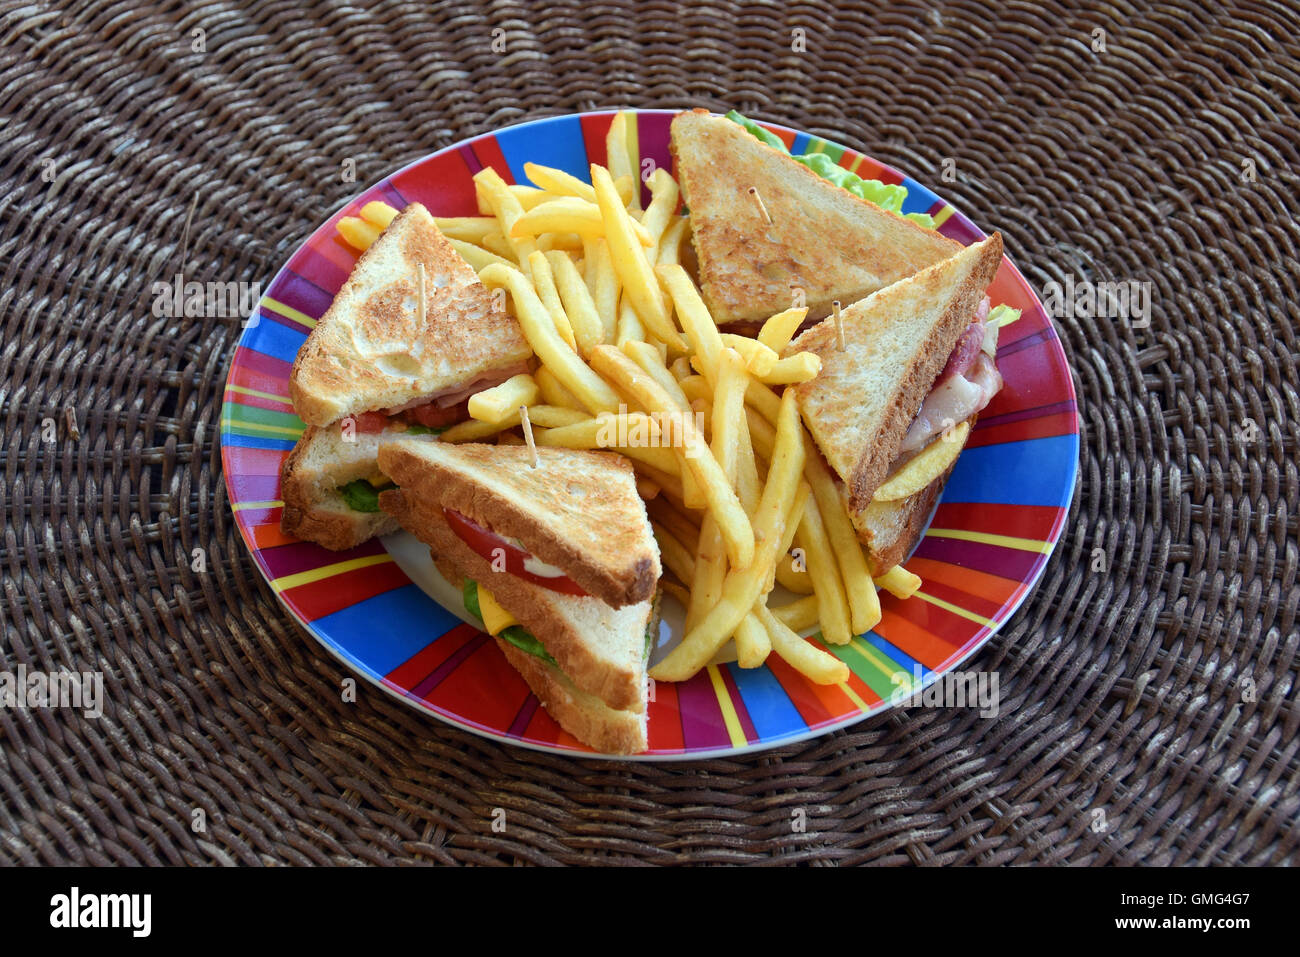 Club sandwich with french fries. Fast food dinner. Stock Photo